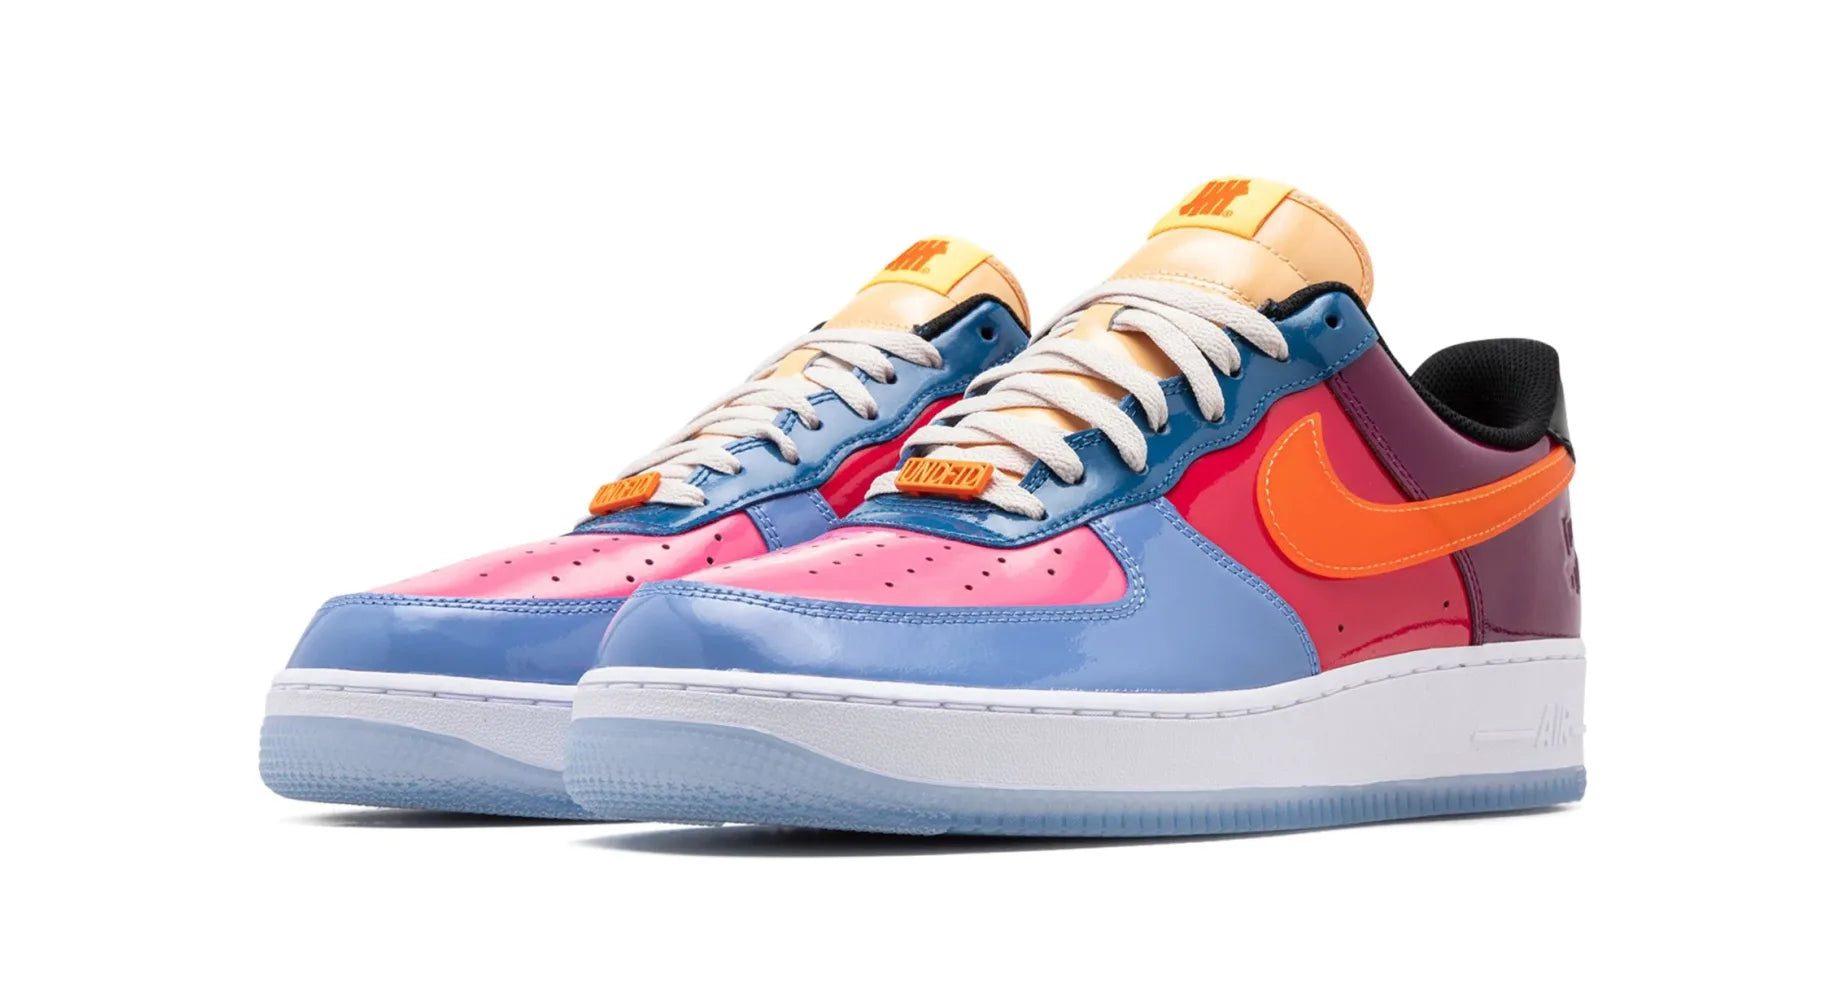 Nike Air Force 1 Low SP Undefeated Multi-Patent Total Orange